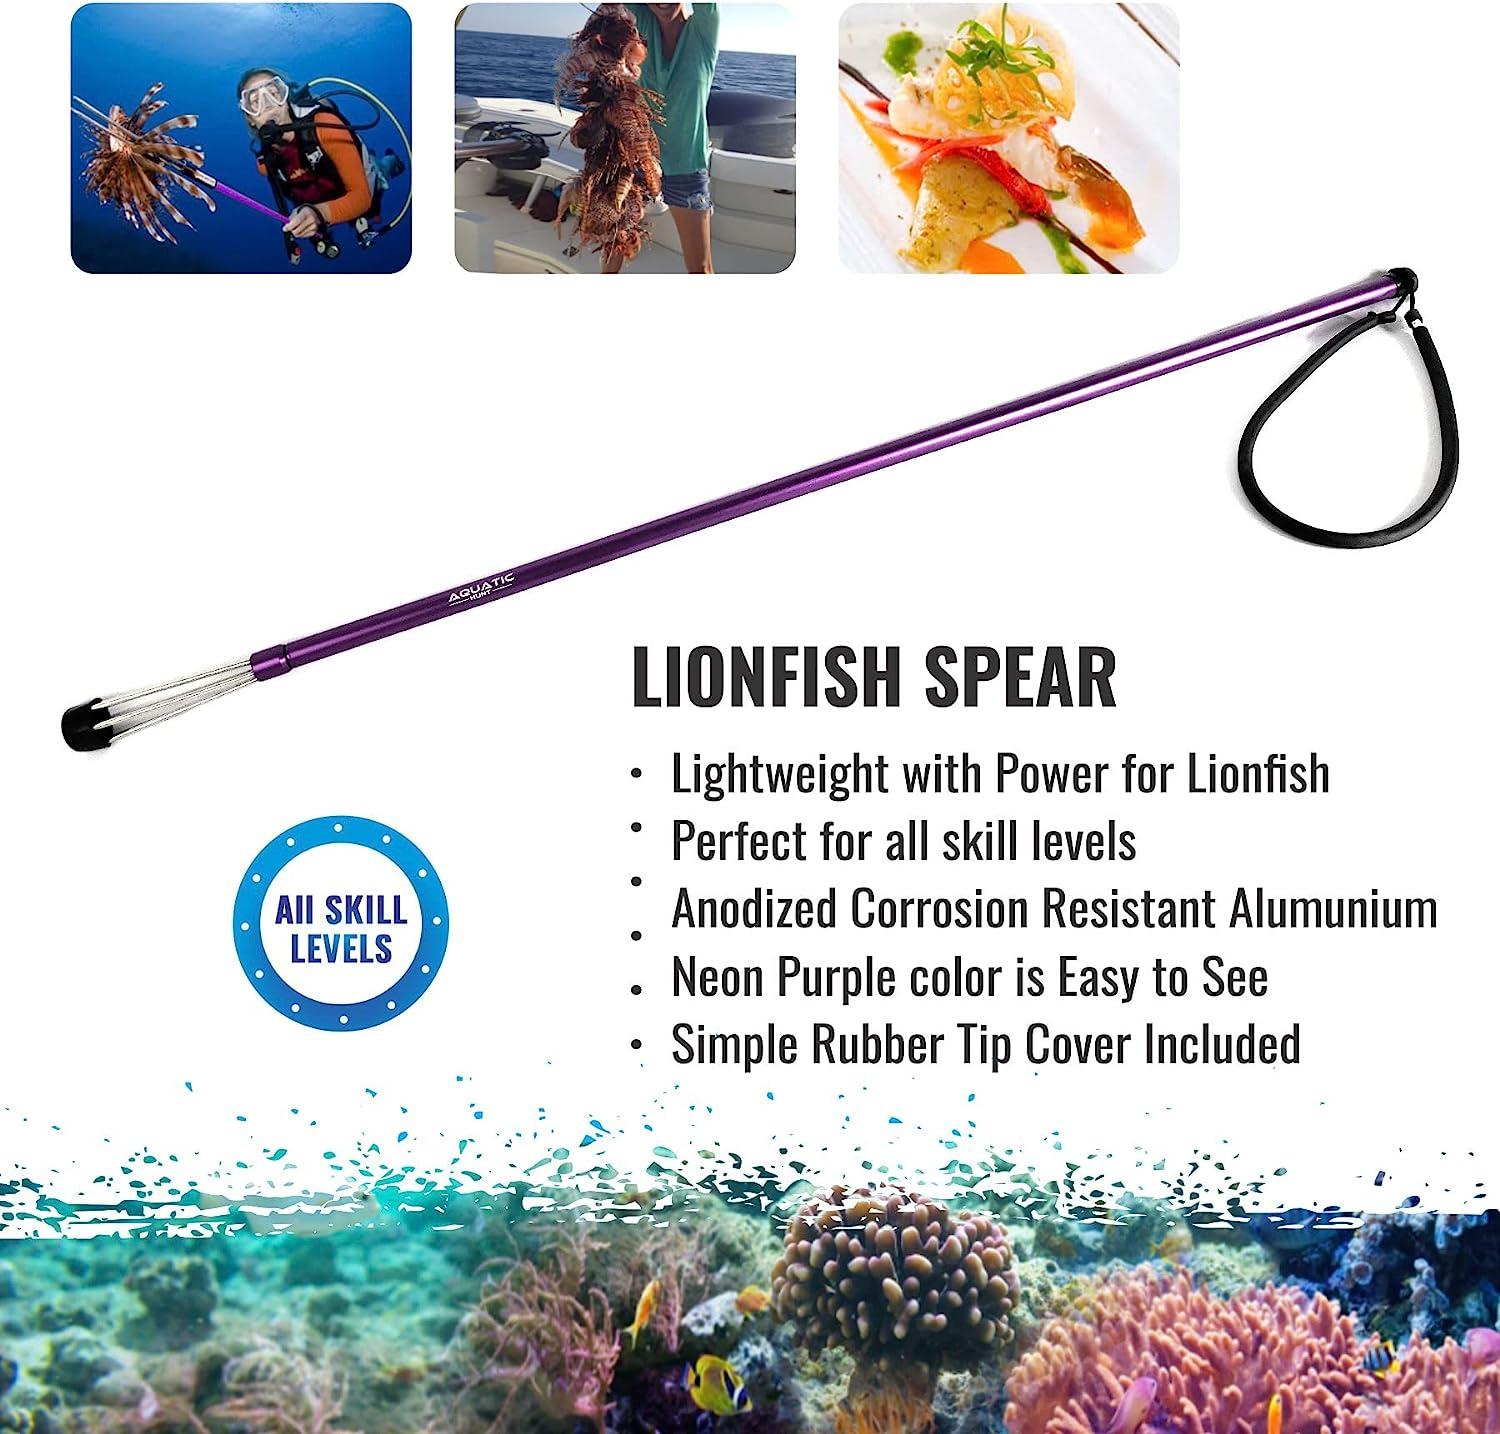 Aquatic Hunt - Spearfishing Diving Lionfish 36 (92cm) Pole Spear with 5  Point Non-Barbed Tip with